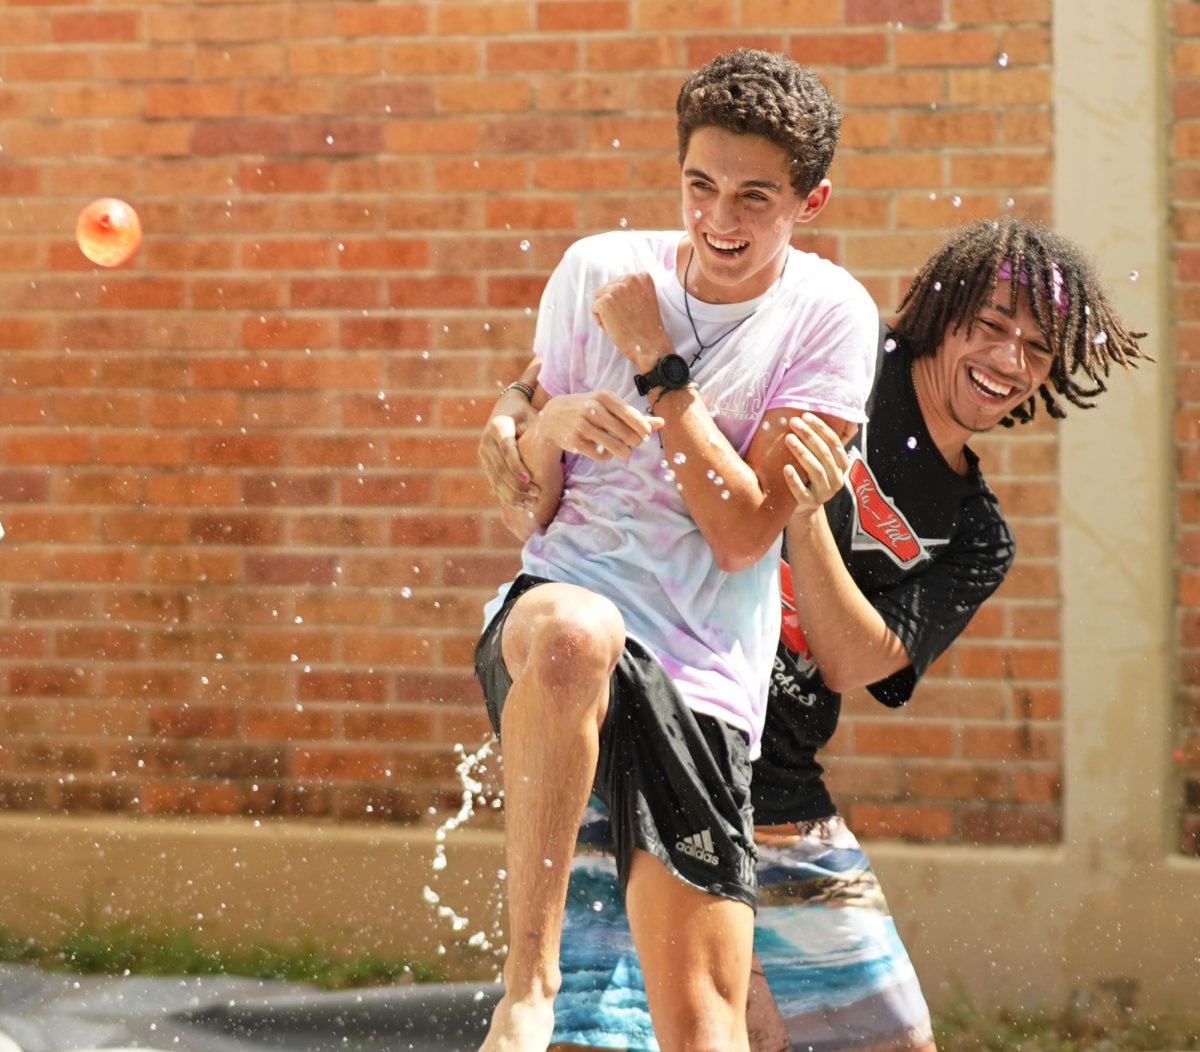 FRIENDLY FIRE FOR A GOOD CAUSE: Senior Peer Assistance and Leadership program member Jude Masoni holds up his fellow PAL, senior David Herring, as a human shield to protect himself from the path of an incoming water balloon. Students paid $1 to throw a balloon at the PALS on Tuesday as part of the shooting PAL-ery, one of the Pink Week fundraisers intended to raise money for the Breast Cancer Resource Center of Central Texas, an Austin-based non-profit that provides personalized support to those affected by breast cancer.  Year after year the PALS put on Pink Week in order to raise funds and awareness for the fight against breast cancer. The PALS put on a variety of different events the whole week at lunch in hopes of both bringing in profits and bringing an exciting week of fun to the McCallum community.   

Herring was made a target of the water balloon by his cross-country teammates.

“I enjoyed seeing my teammates coming out to donate as I was telling them about it the week prior,” Herring said. “I was also just having fun on that nice day with my fellow PALS. Some of them that did the PAL-lery that day, like Jude, I’ve known since elementary school.” 